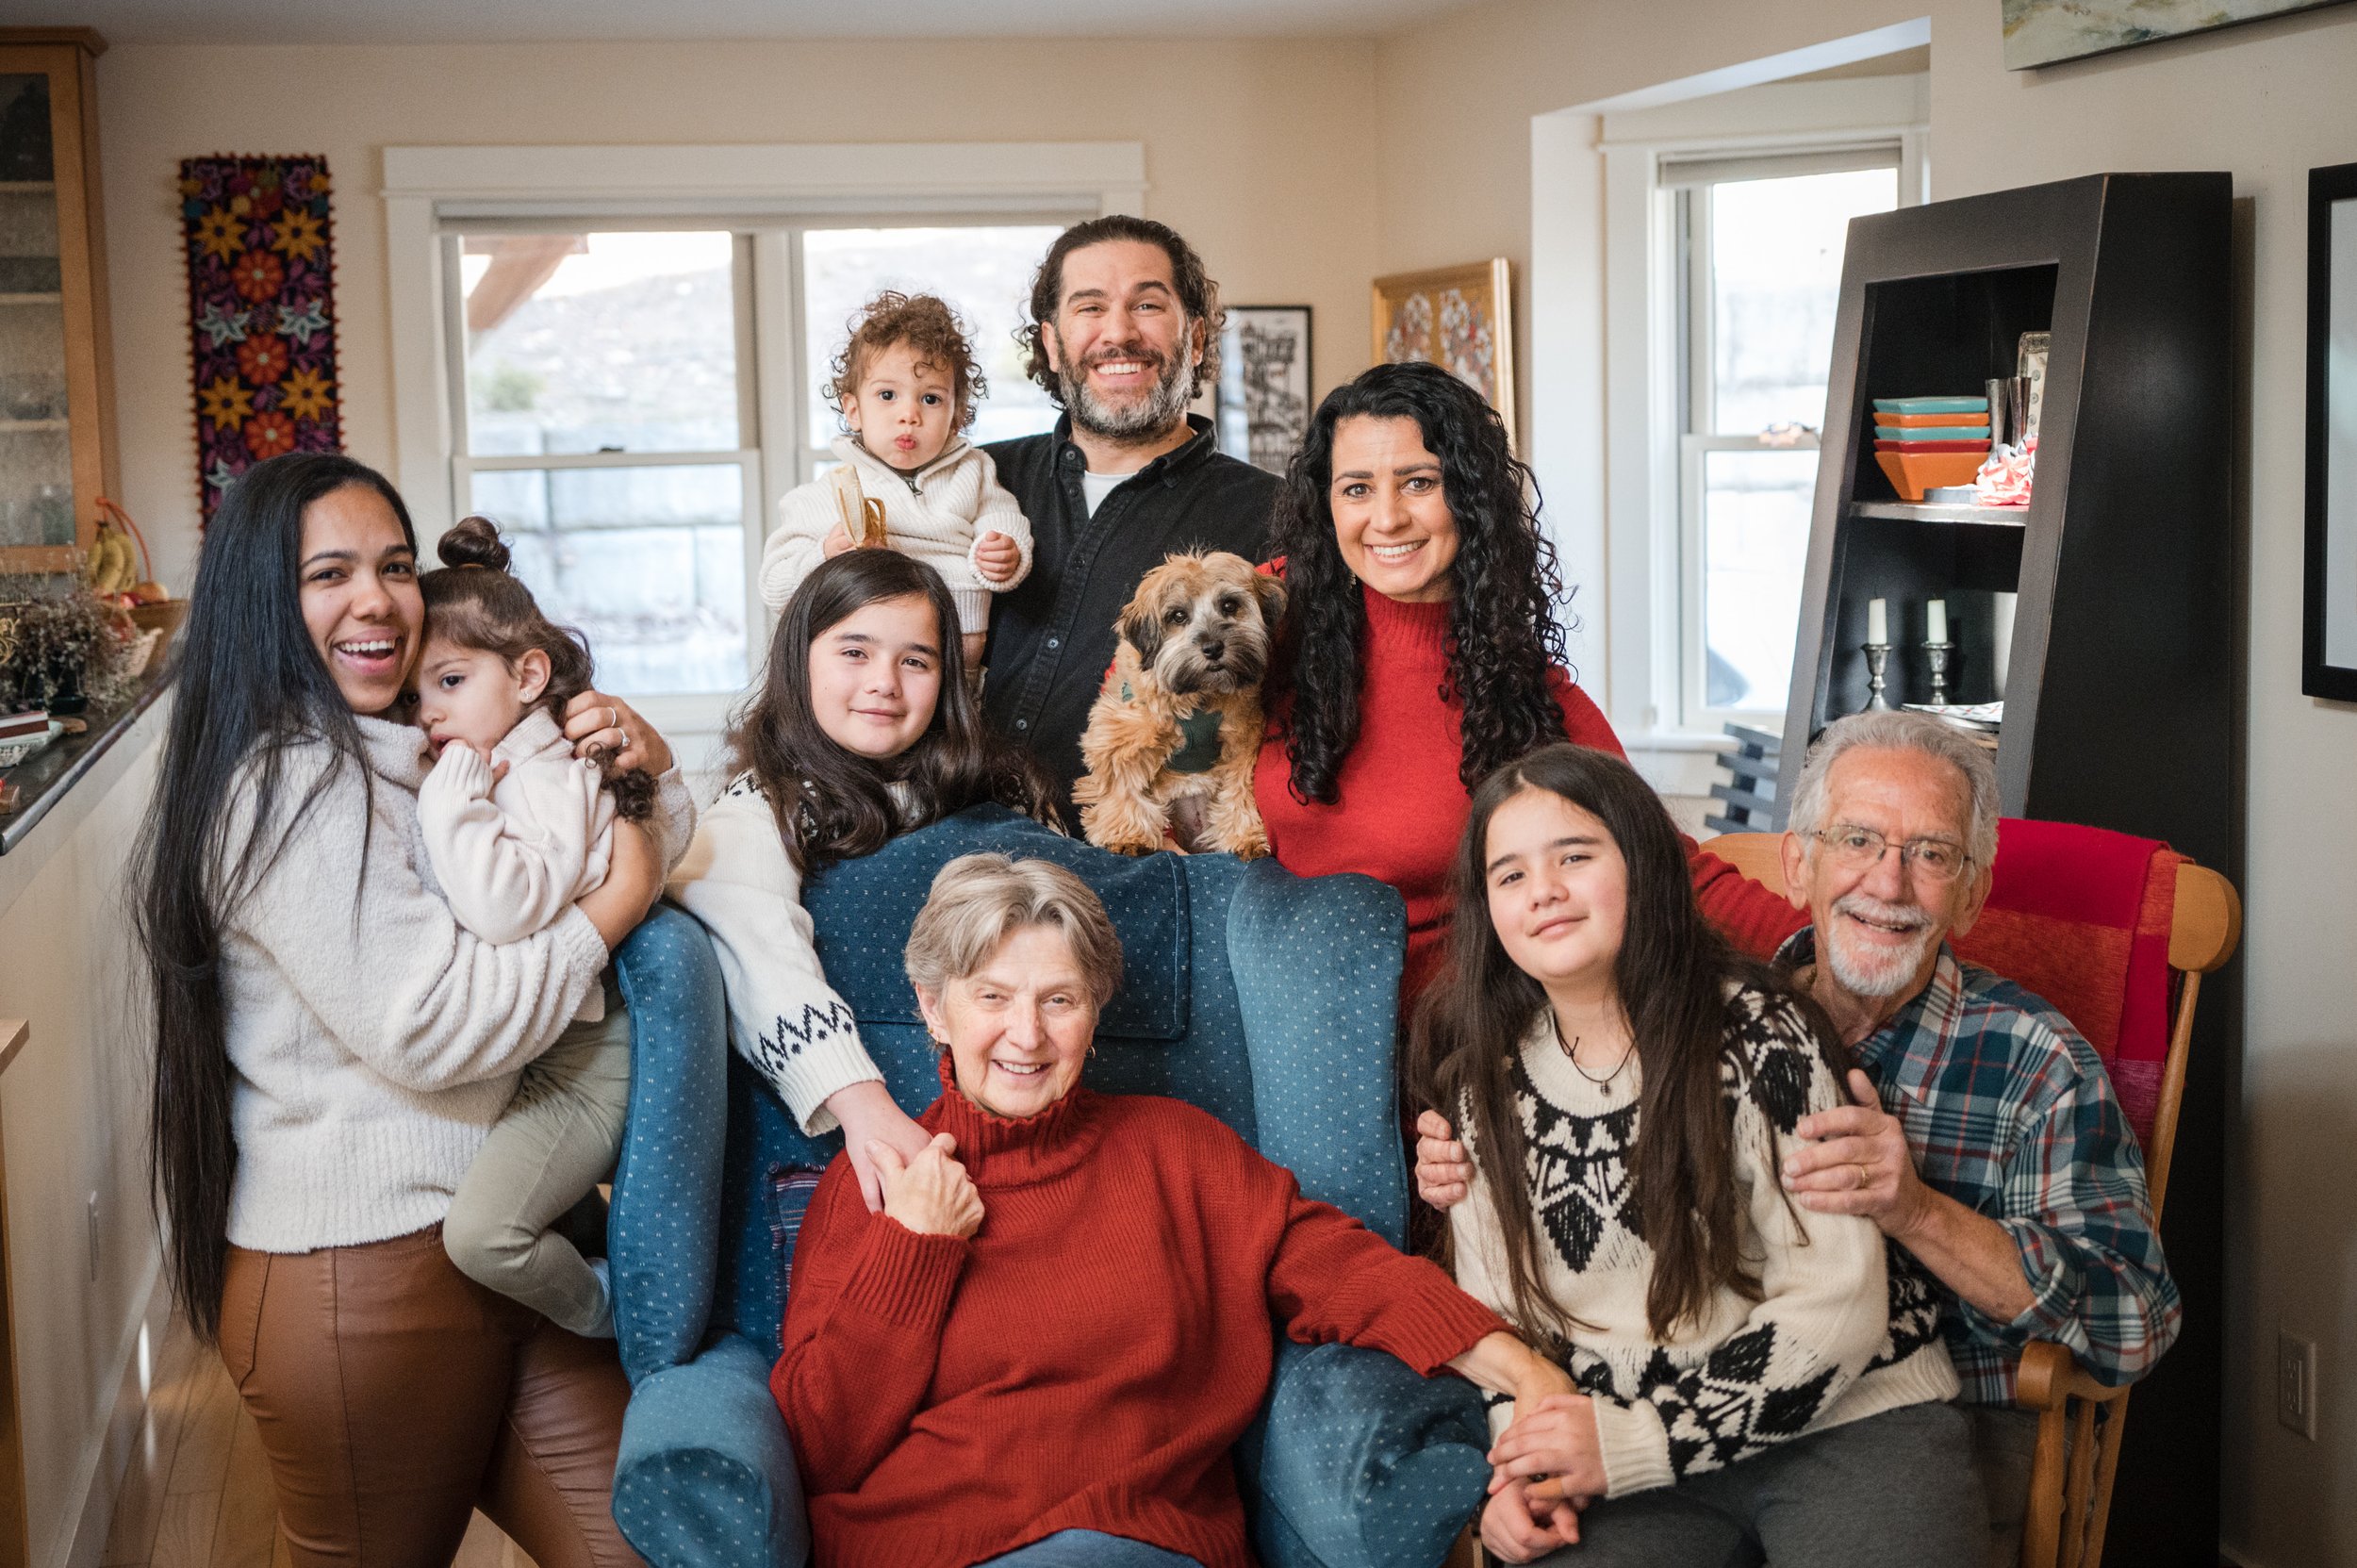 Multi-generational in-home family portrait by new england based family photographer Michelle Schapiro